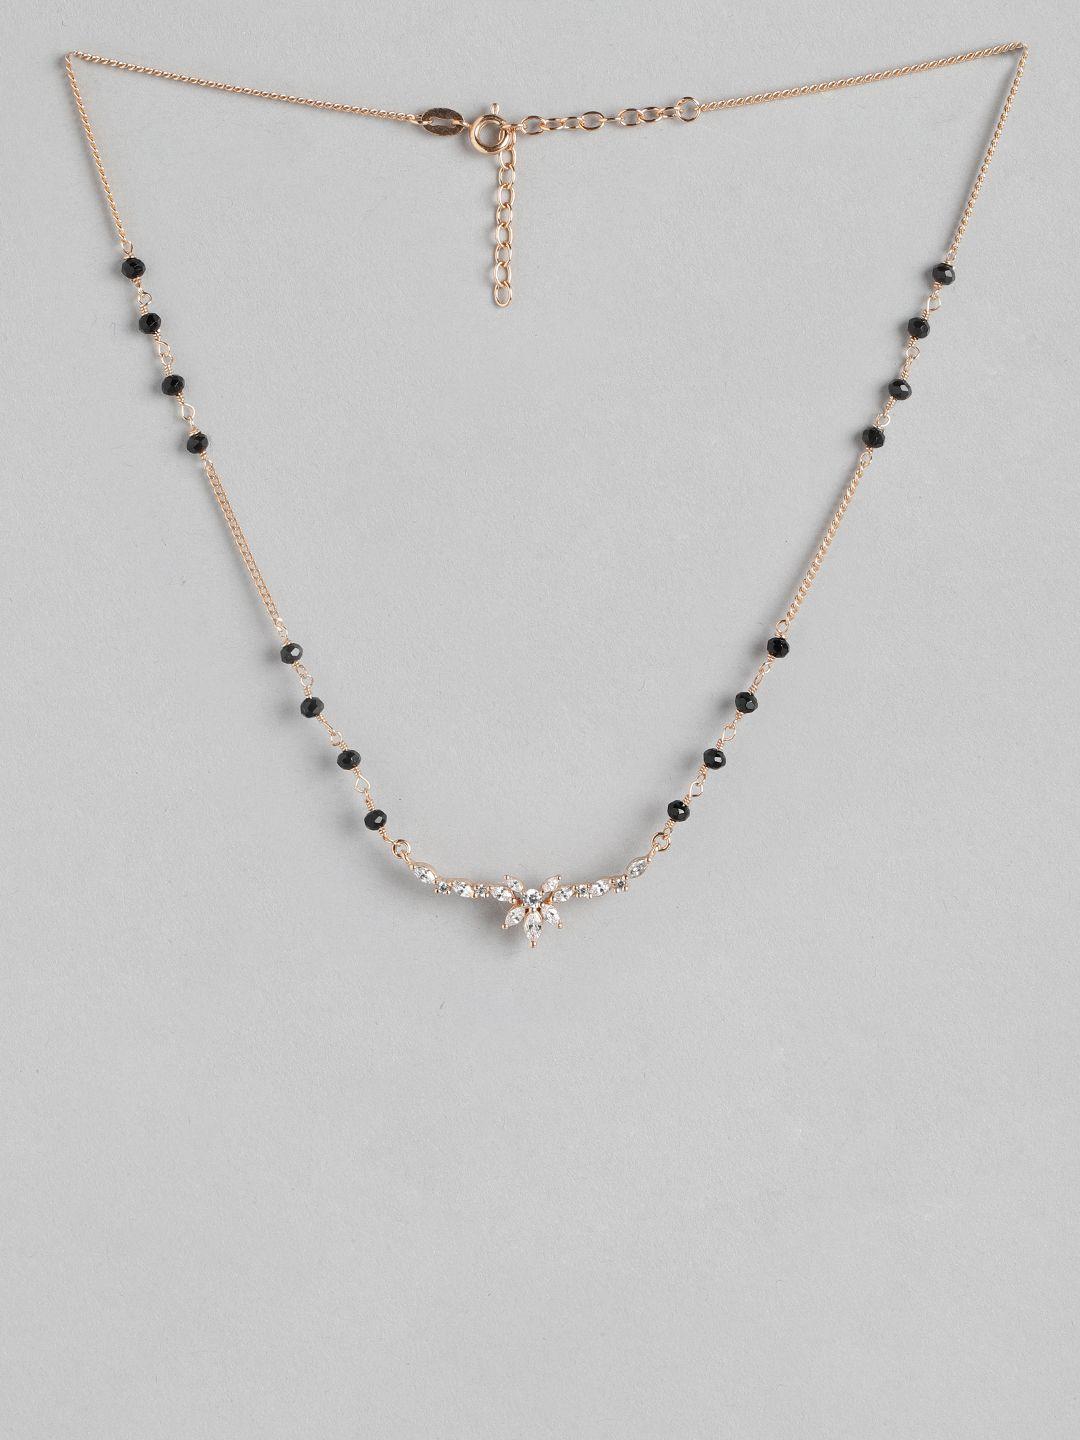 carlton-london-rose-gold-plated-crystals-studded-mangalsutra